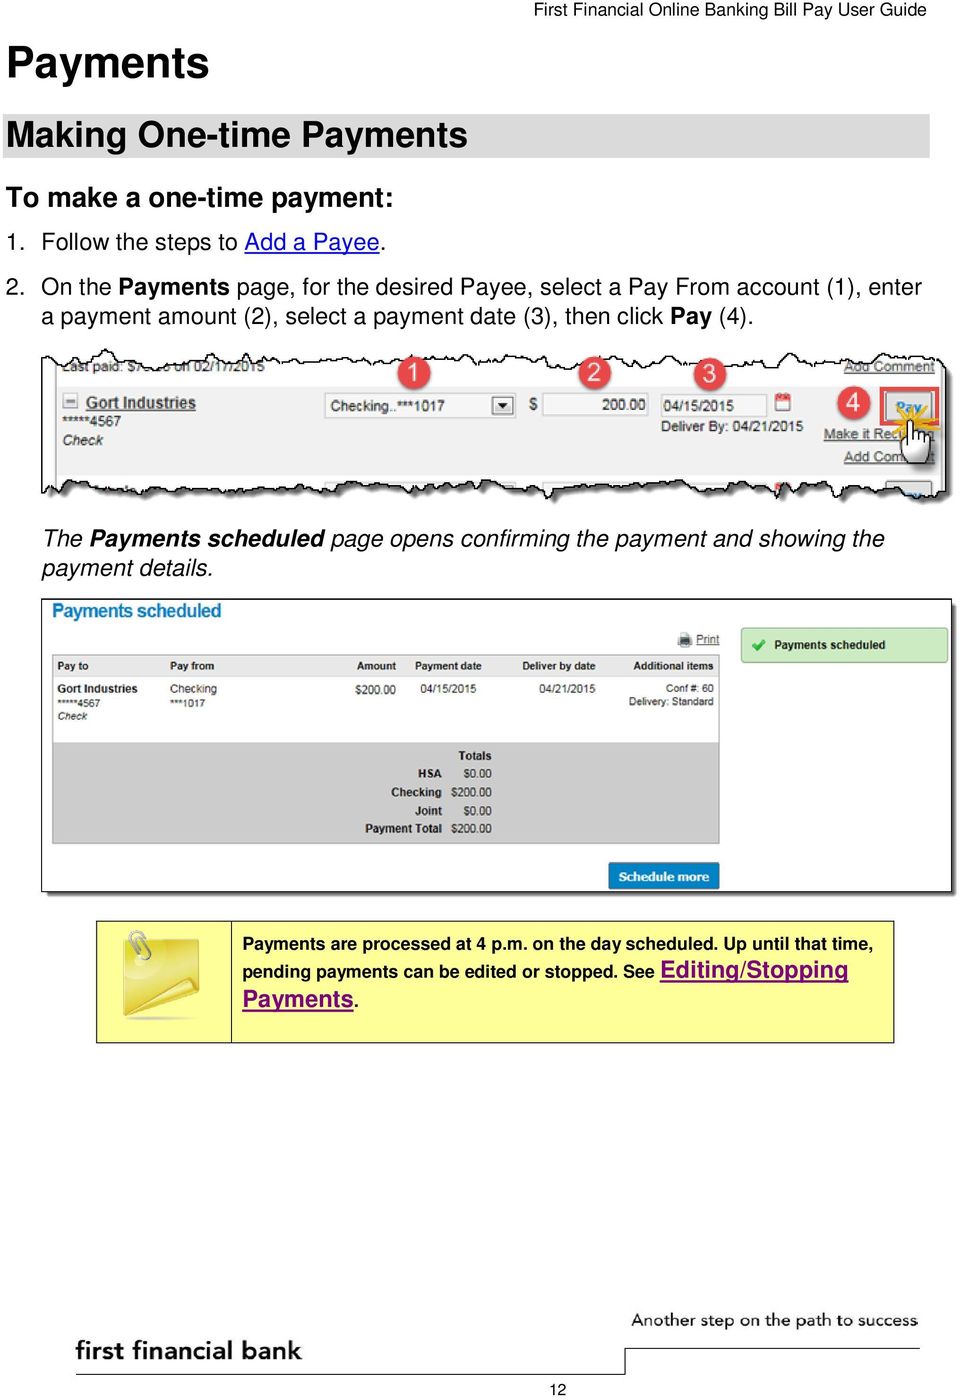 On the Payments page, for the desired Payee, select a Pay From account (1), enter a payment amount (2), select a payment date (3), then